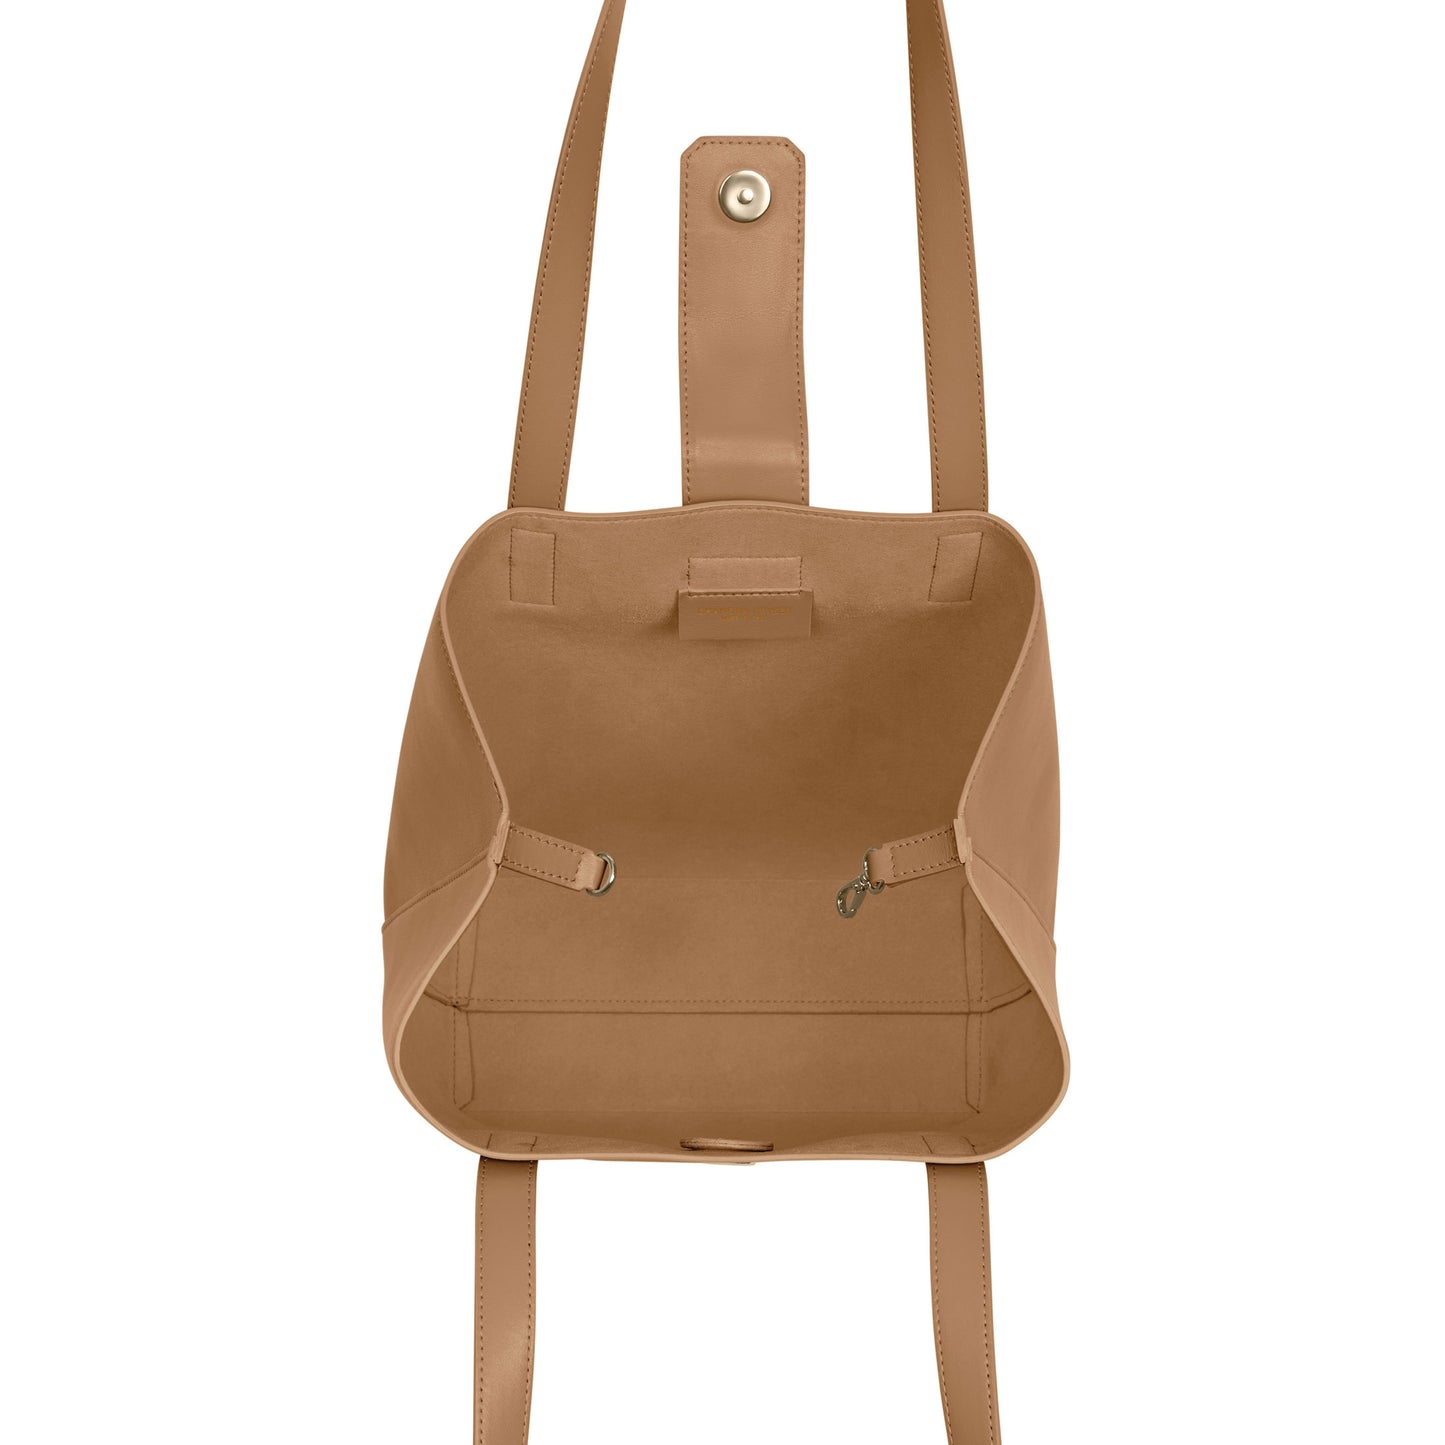 Lightweight bucket bag has two shoulder straps, snap closure, separate micro-suede zip pouch and inside clasp to contract and expand bag  100% leather, smooth matte texture Magnet snap closure Micro-suede lining Two shoulder straps, 10” drop Micro-suede zip pouch can easily be attached to inside of bag Tote measures: 12”h x 11”w x 4”d Pouch measures: 5”h x 8”w x .5”d Dust bag included Handcrafted by artisans in a family-owned factory Exclusively Made in Italy